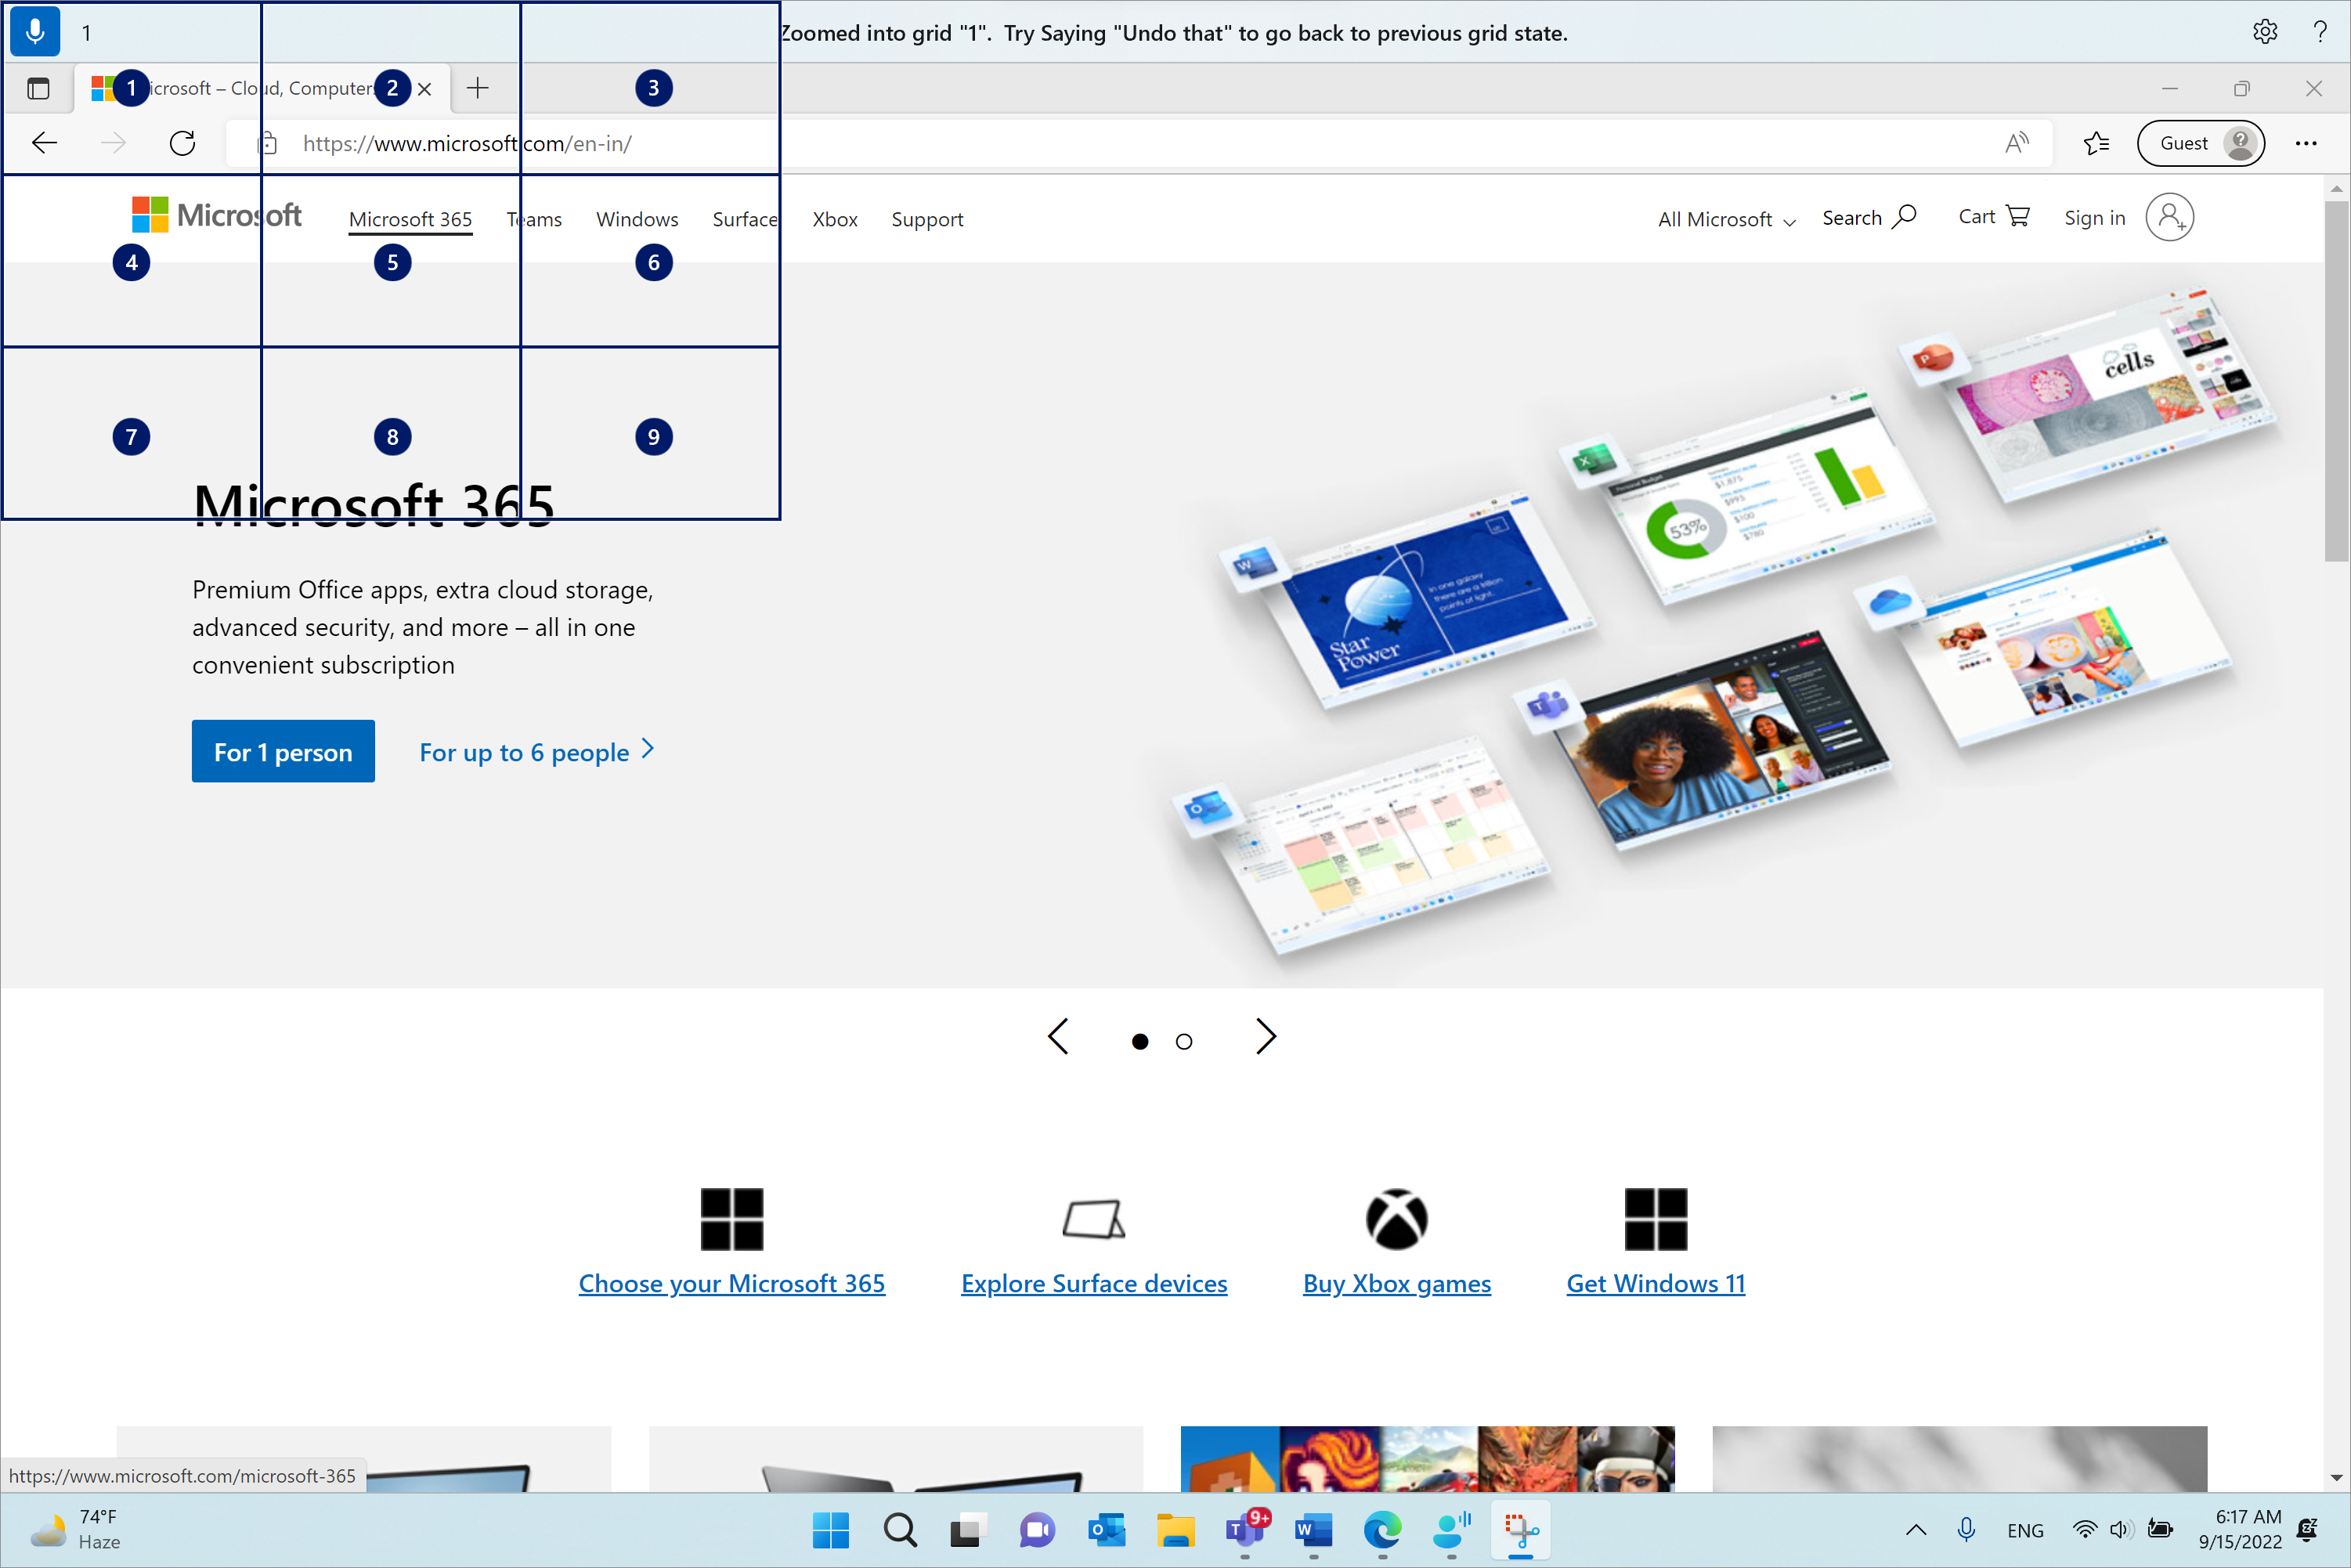 Microsoft Edge is open and on the Microsoft.com page. The voice access bar is on top and in listening state. The command issued is “1” and the feedback displayed is “Zoomed into grid “1”. Try saying “undo that” to go back to previous grid state.”